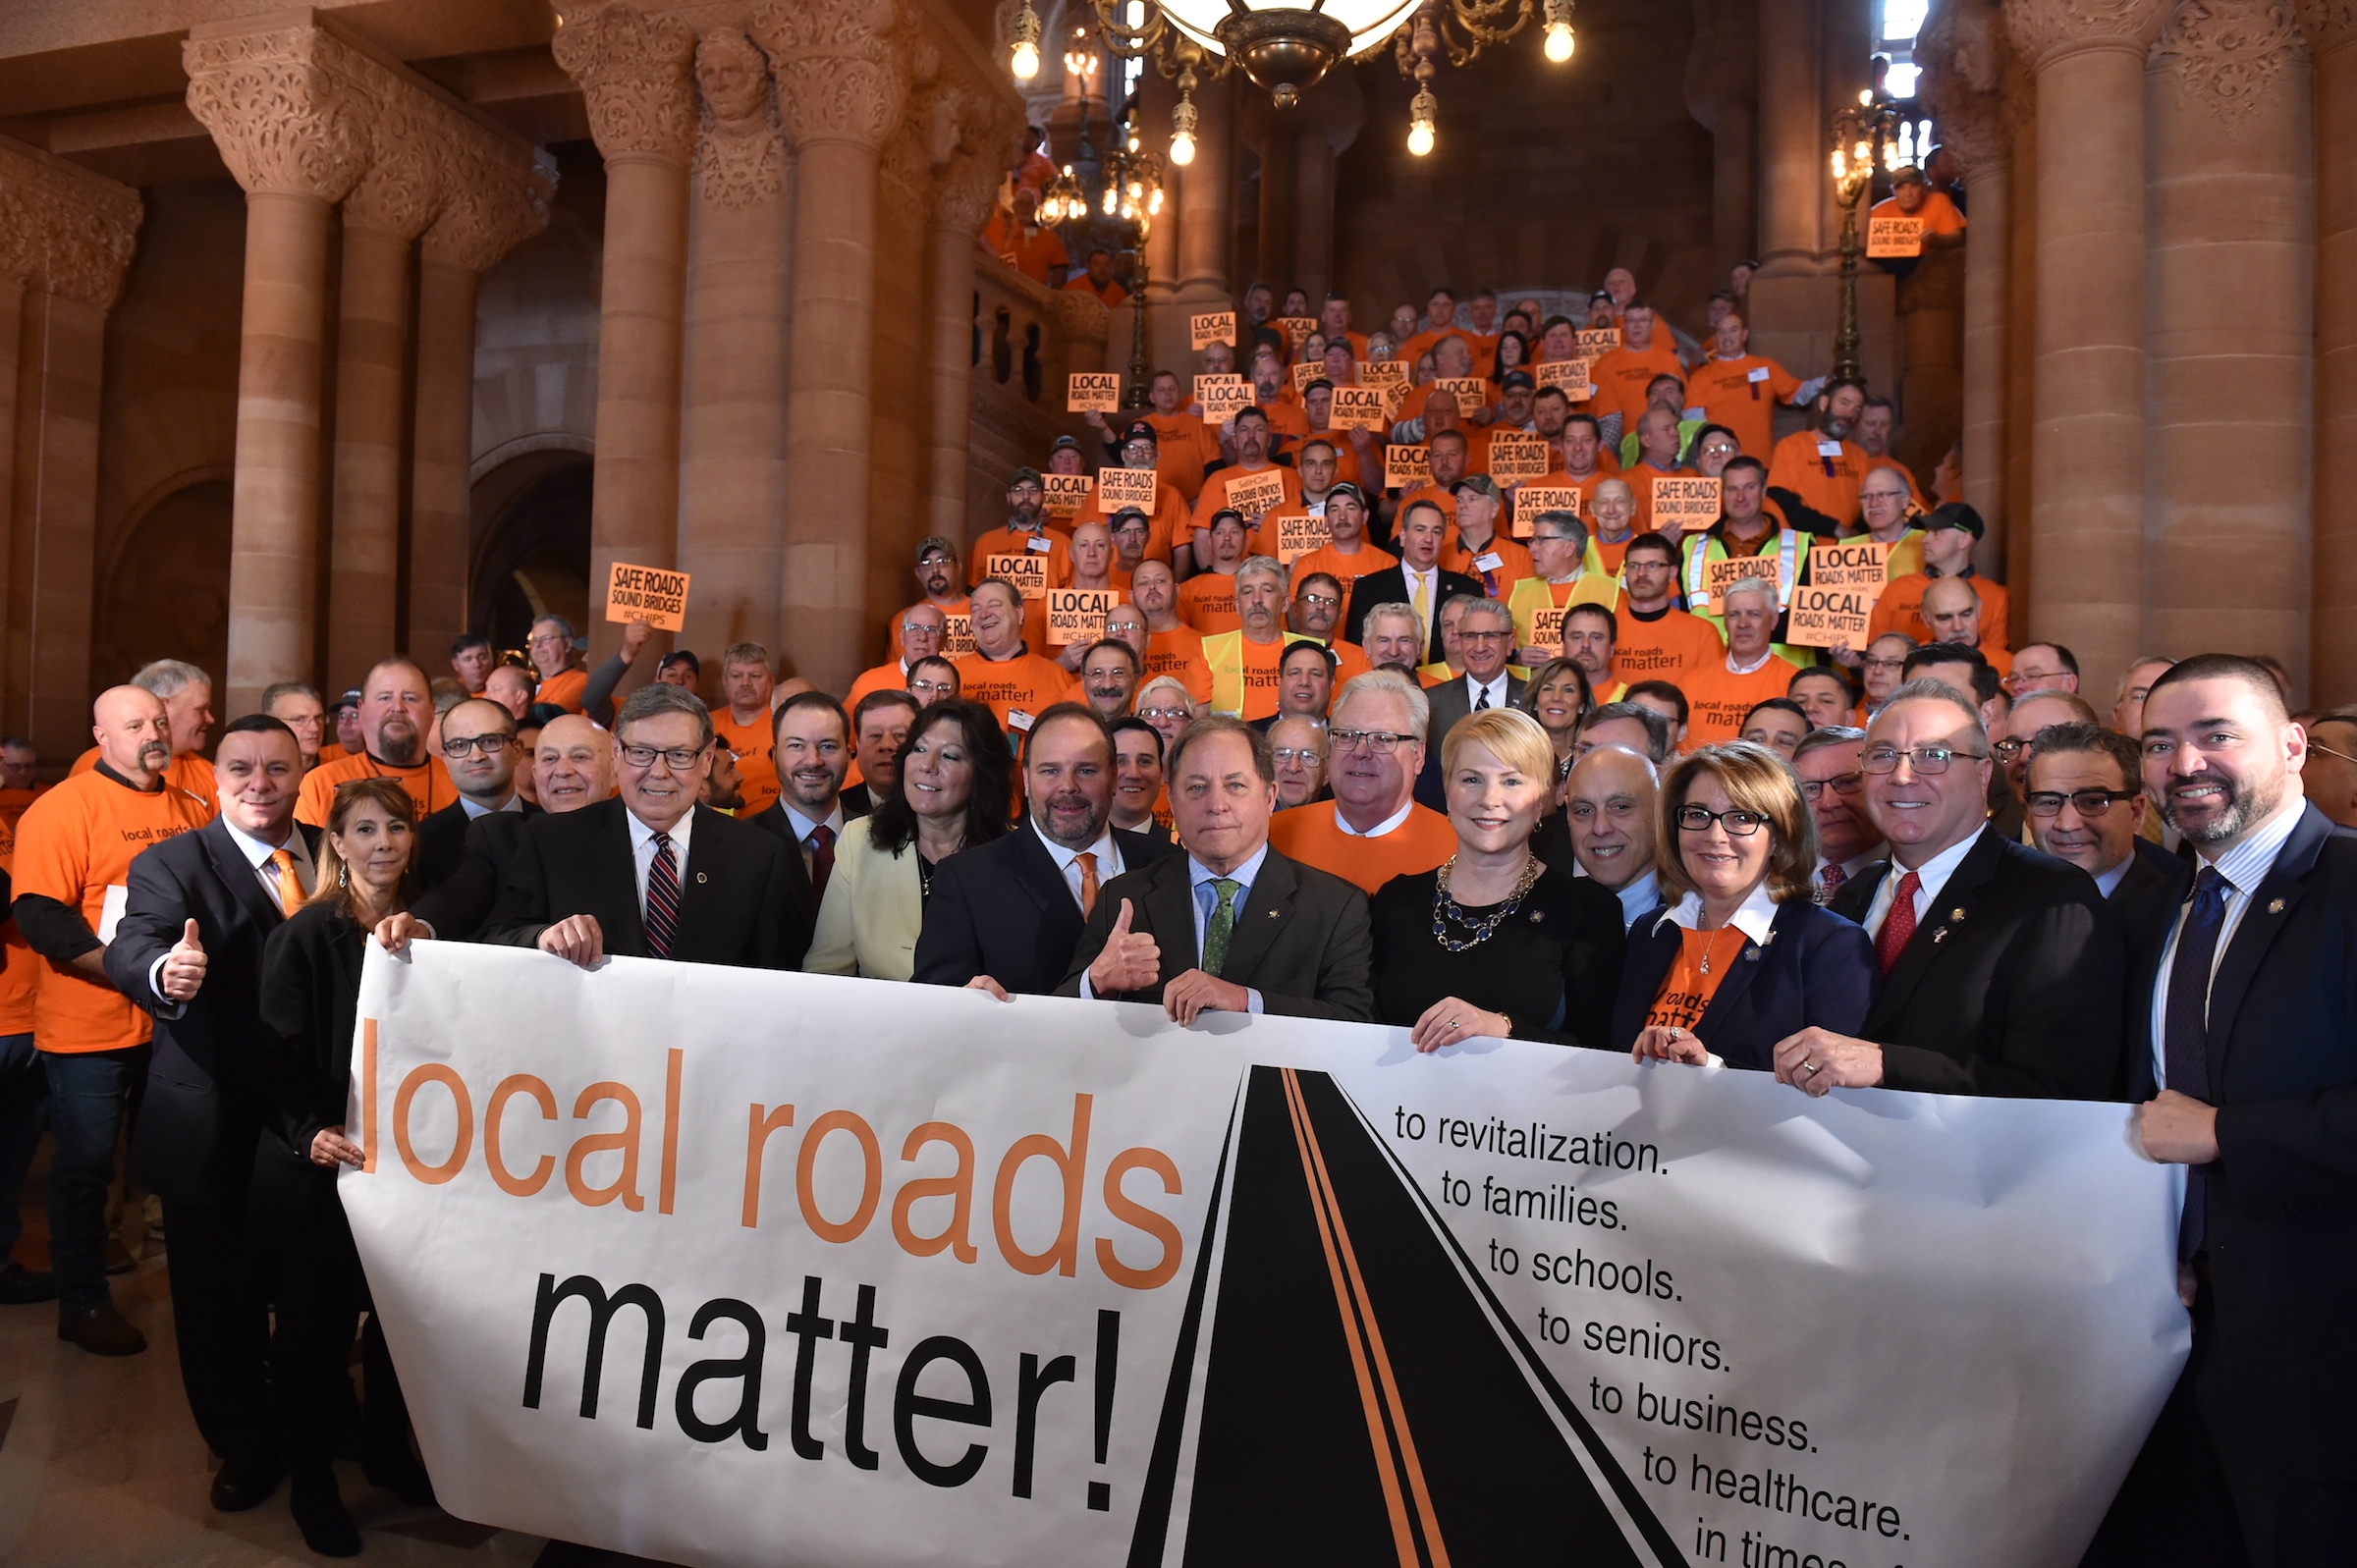 State Senator Tom O’Mara (R,C,I-Big Flats), Assemblyman Phil Palmesano (R,C,I-Corning) and a group of state Senators and members of the Assembly today joined a statewide coalition of county and town highway superintendents and other local leaders to